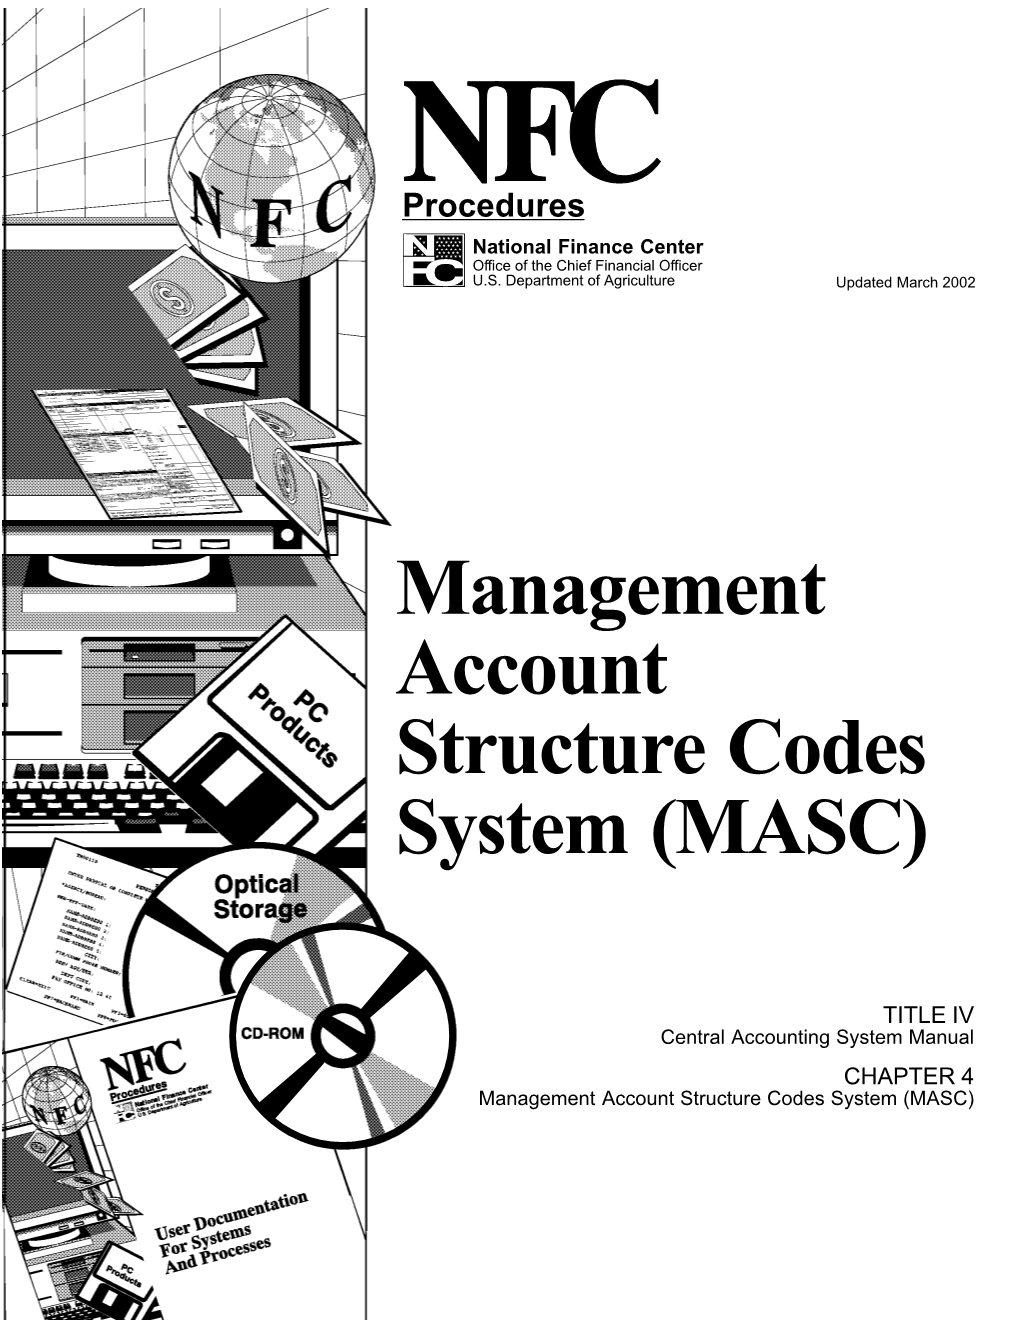 Management Account Structure Codes System (MASC)